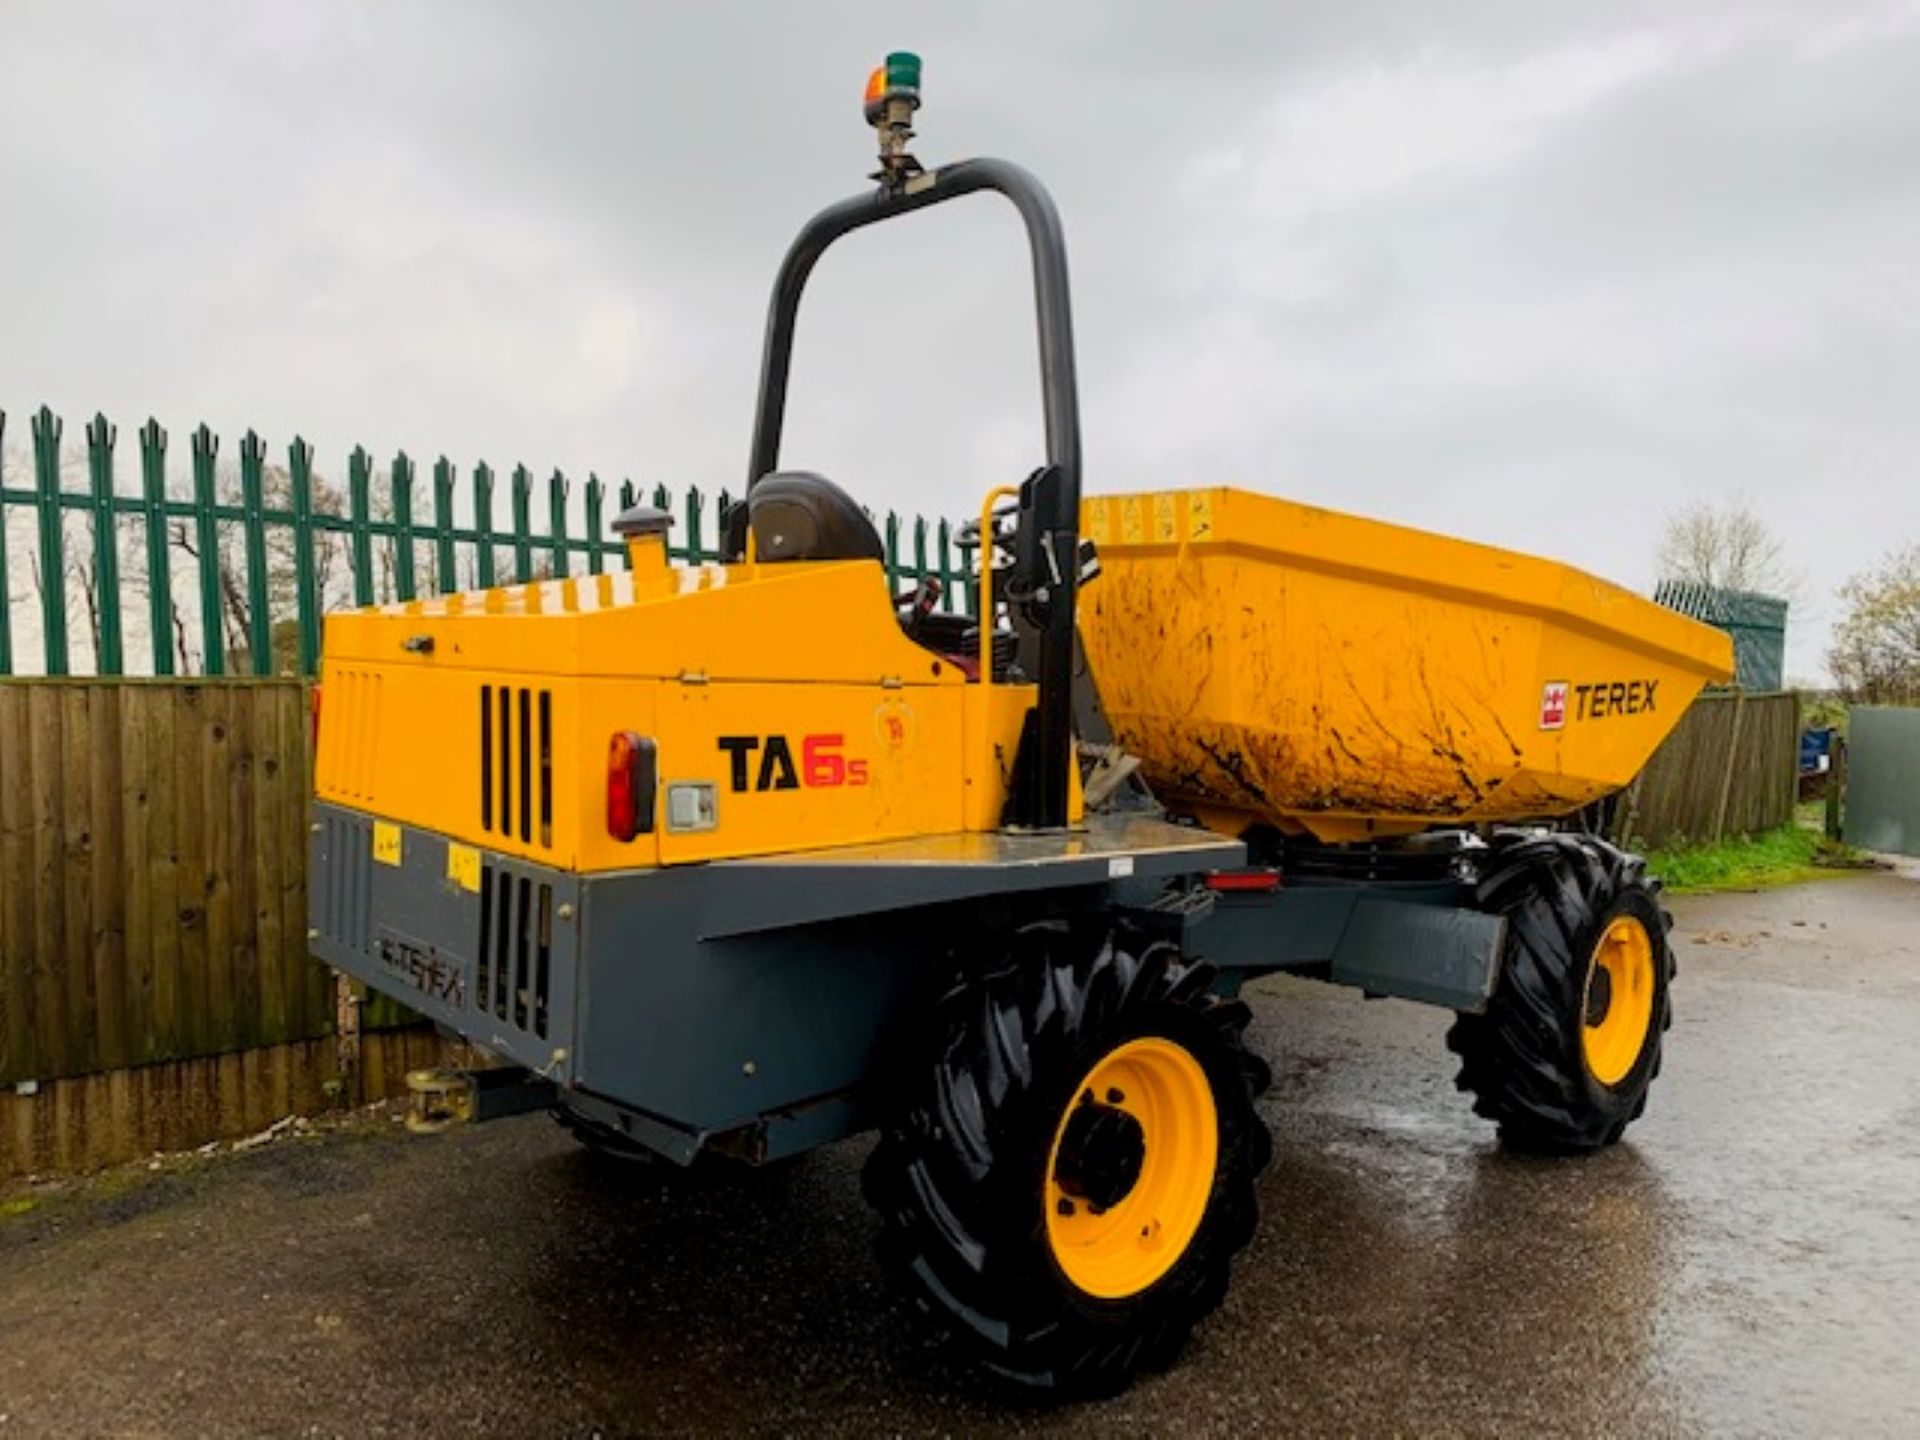 TEREX TA6 S SWIVEL DUMPER, YEAR 2017, 680 HOURS, GOOD TYRES, ORANGE AND GREEN BEACONS, CE MARKED - Image 5 of 12